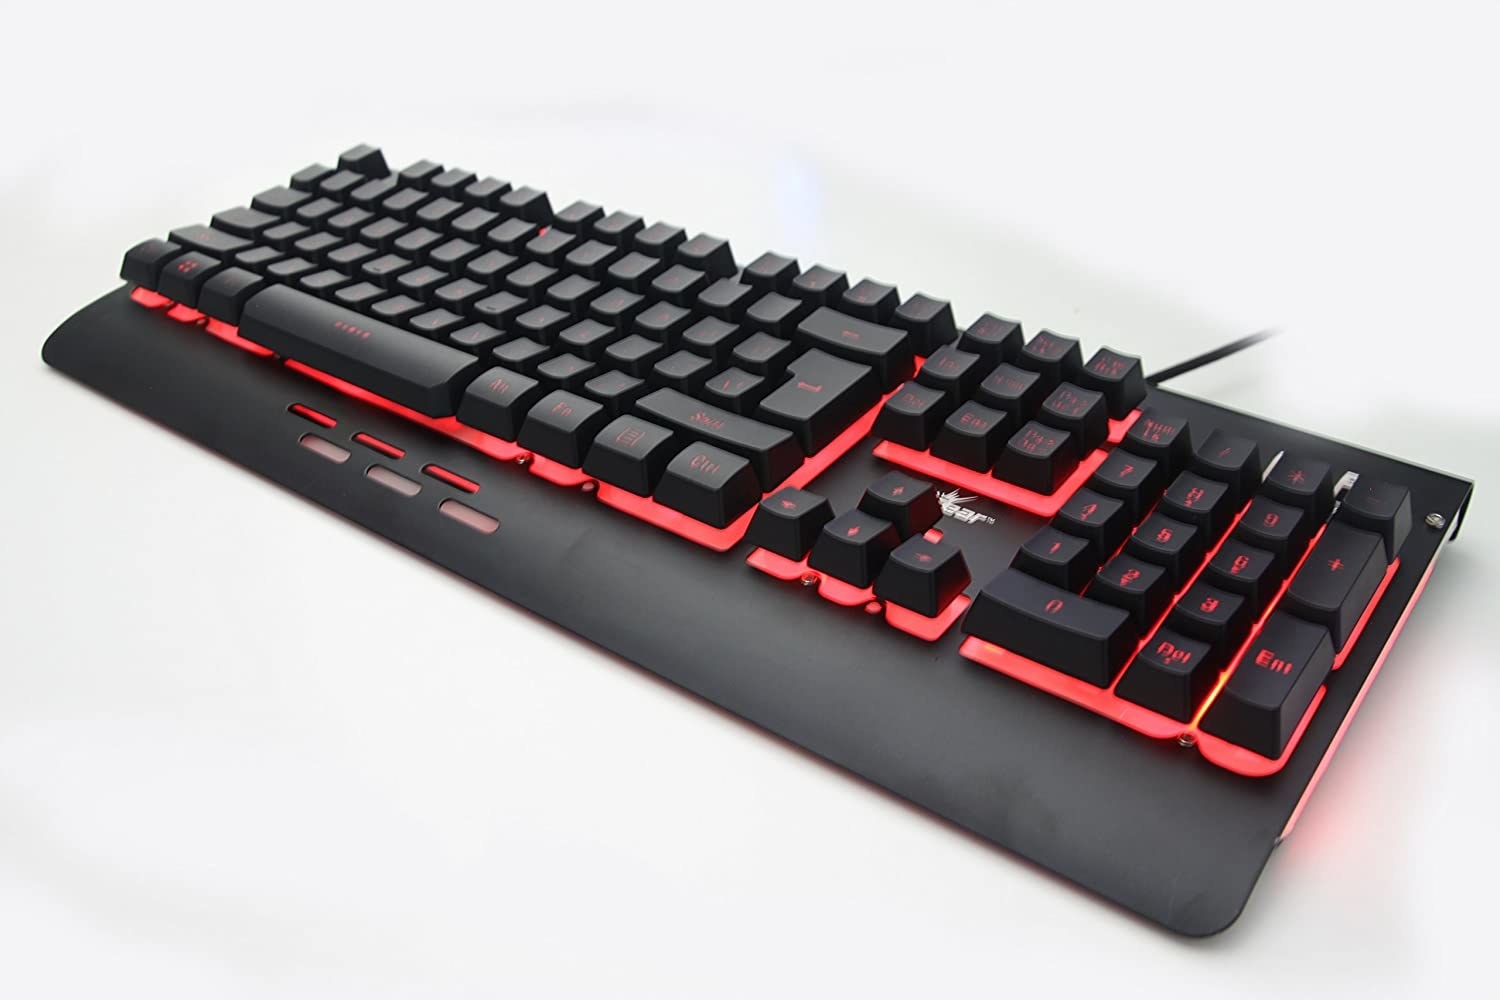 A black keyboard with red backlighting.